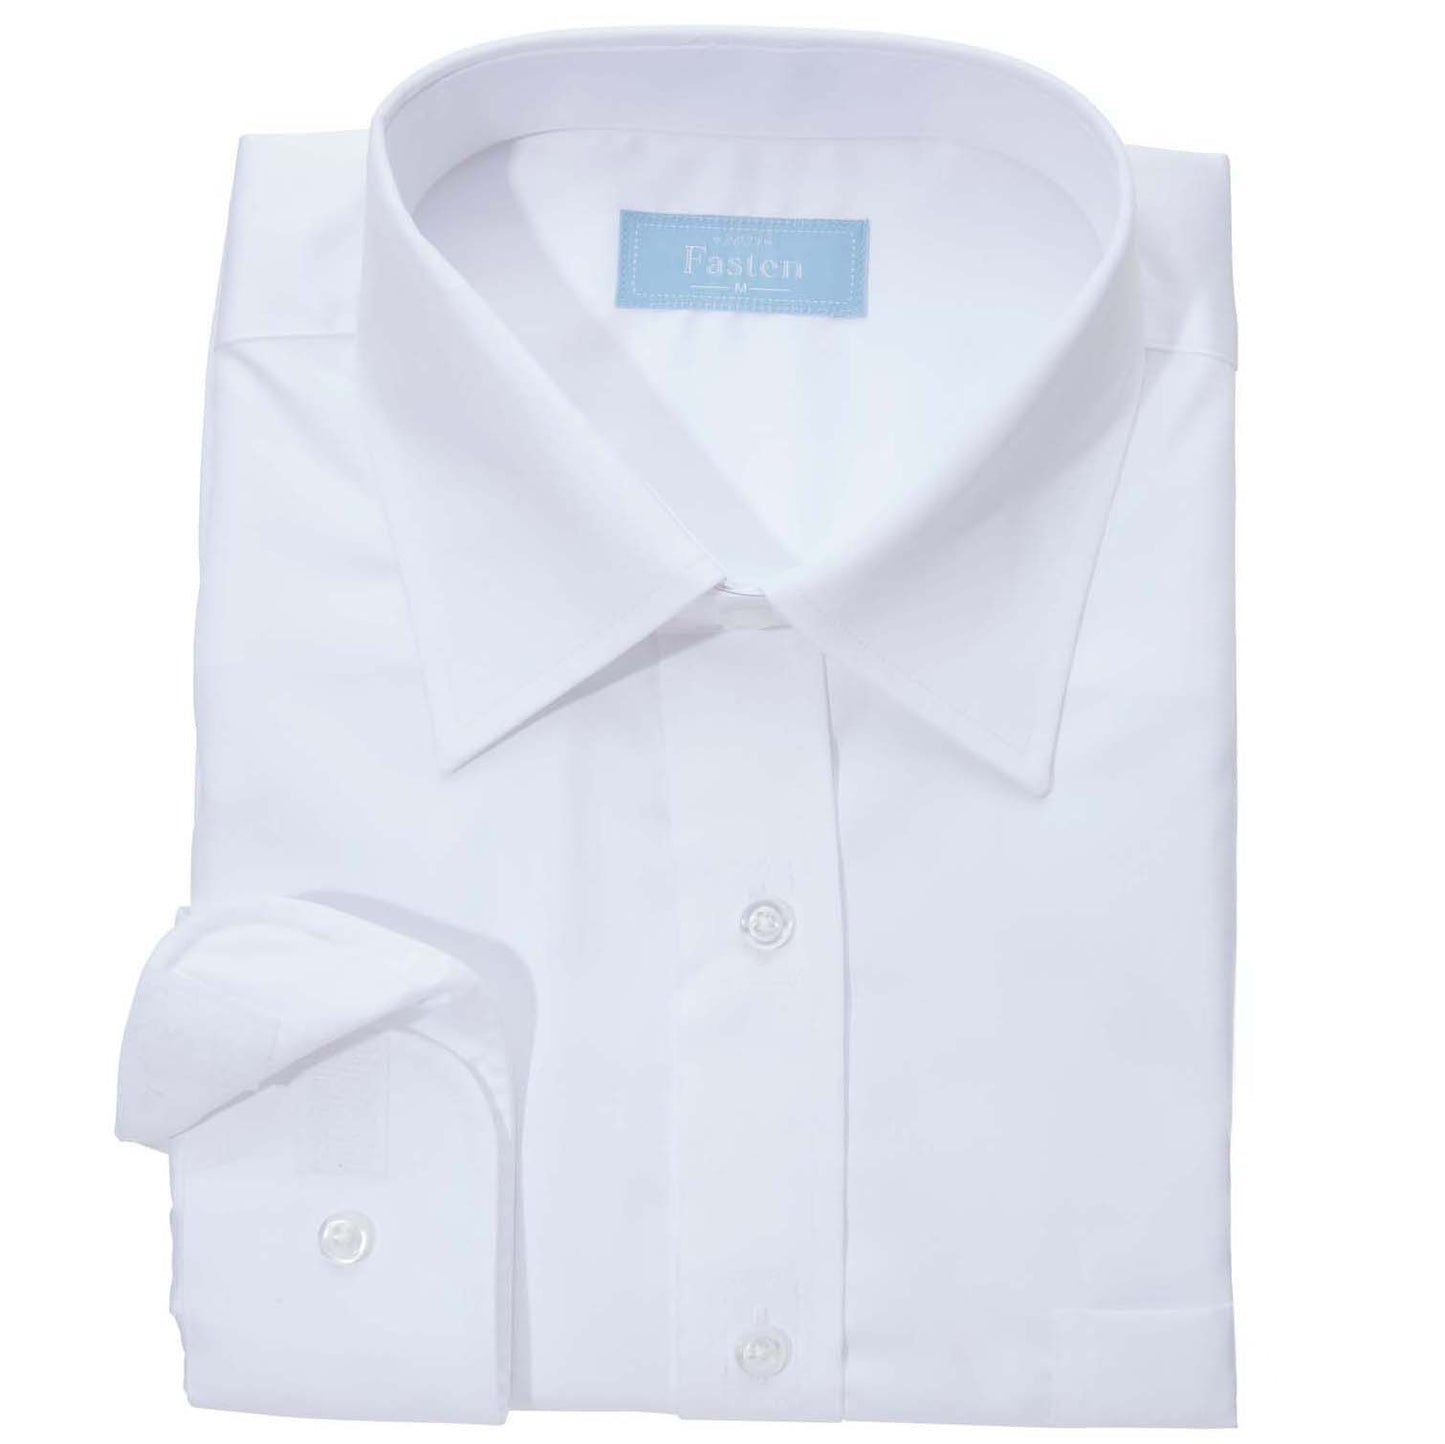 The Fasten Launch Shirt in white with open cuff